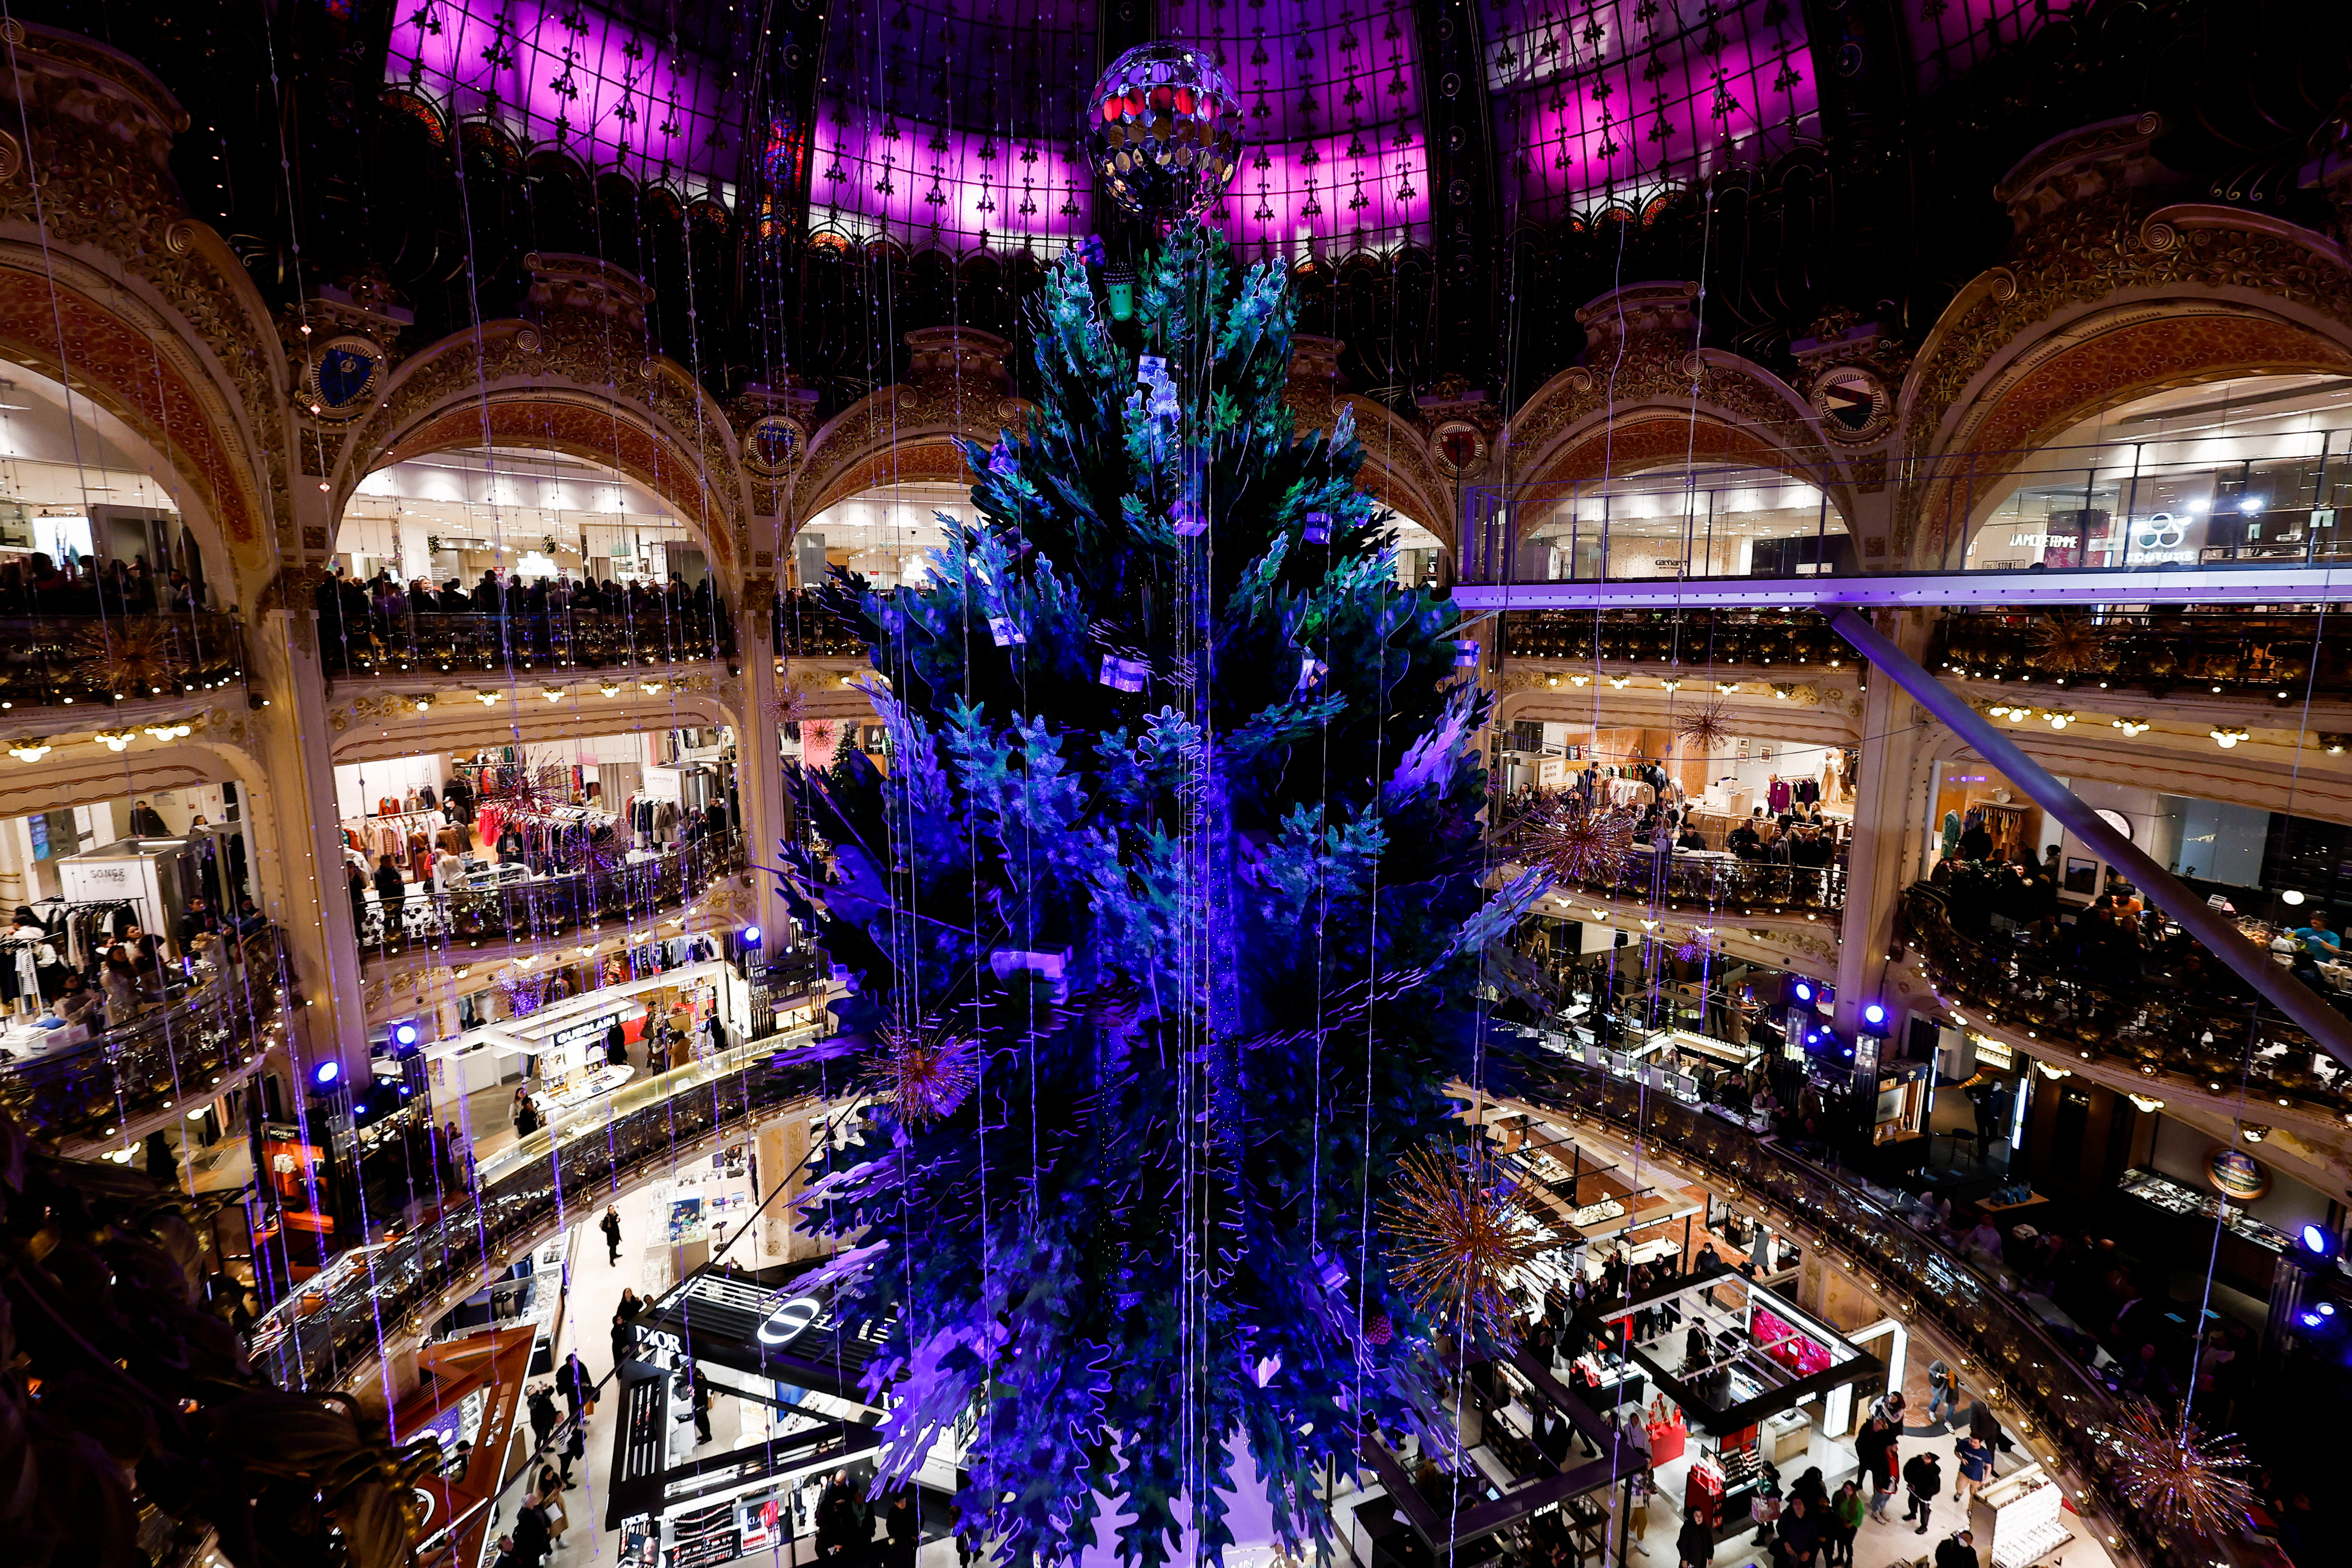 Galeries Lafayette: the best shopping mall in Paris! - Galeries Lafayette  Paris Haussmann